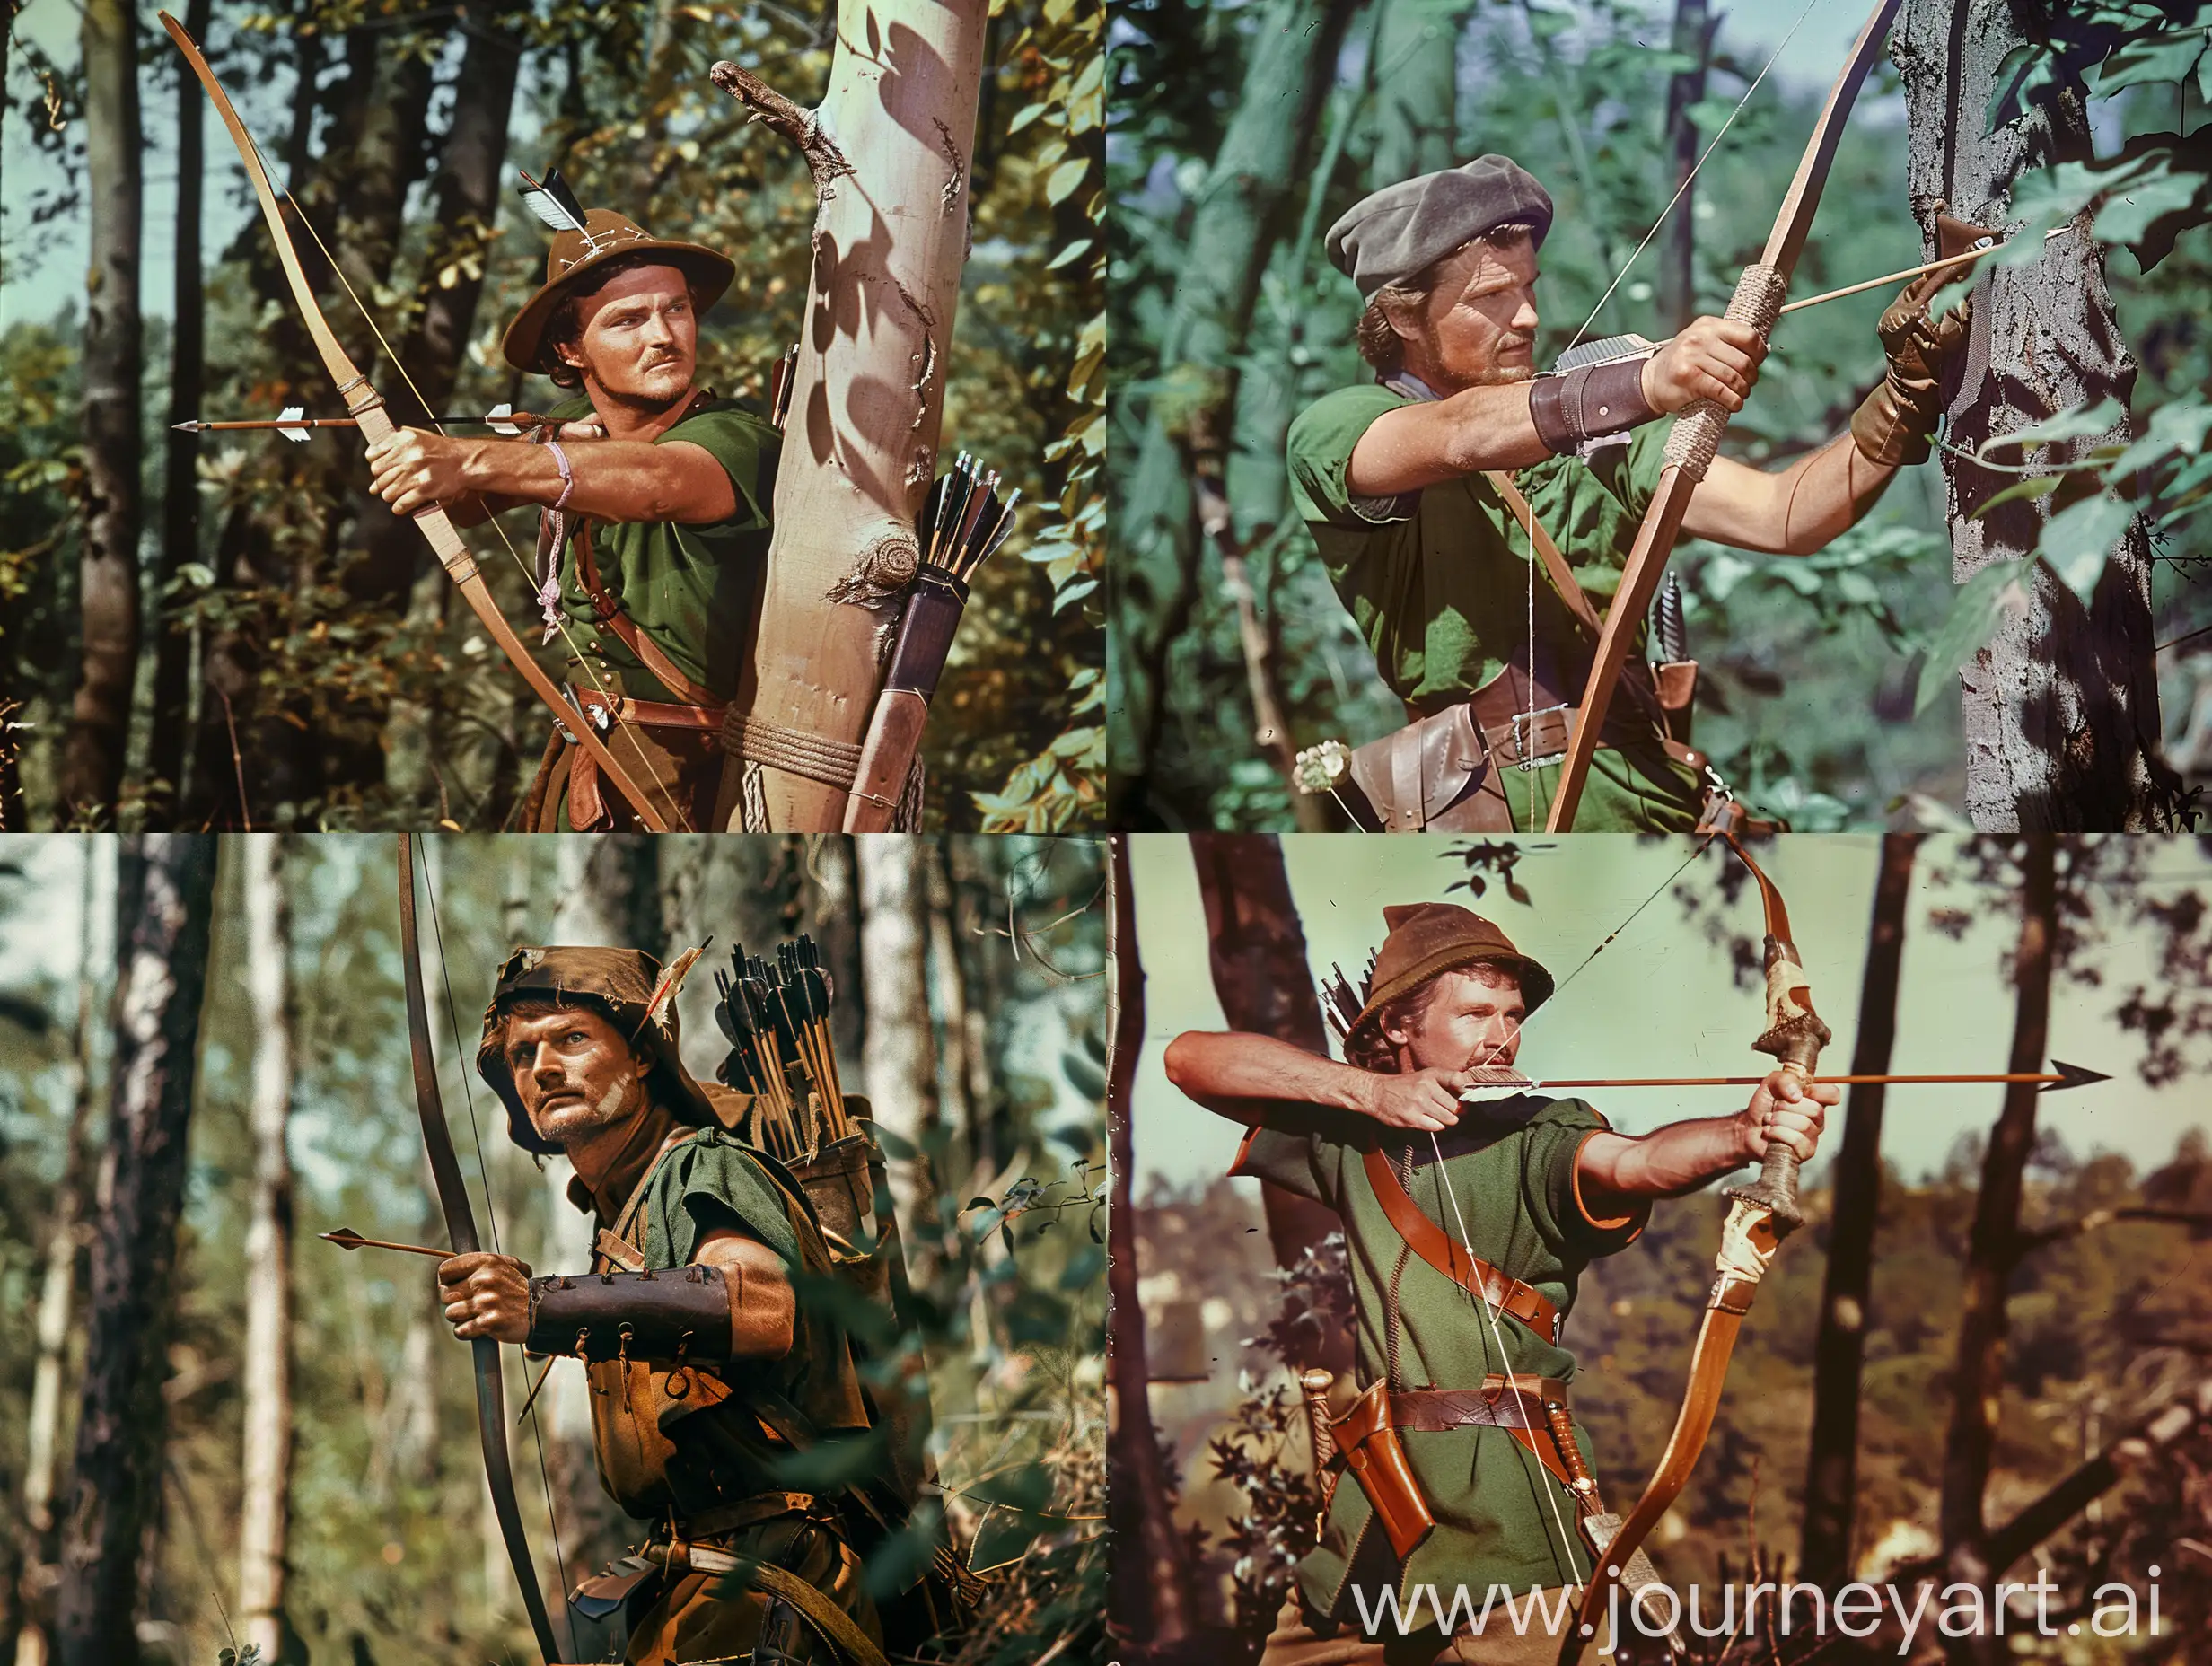 A hunter man dressed like Robin Hood is searching the forest with a knife and a bow and arrow,1950's Superpanavision 70, vintage color
